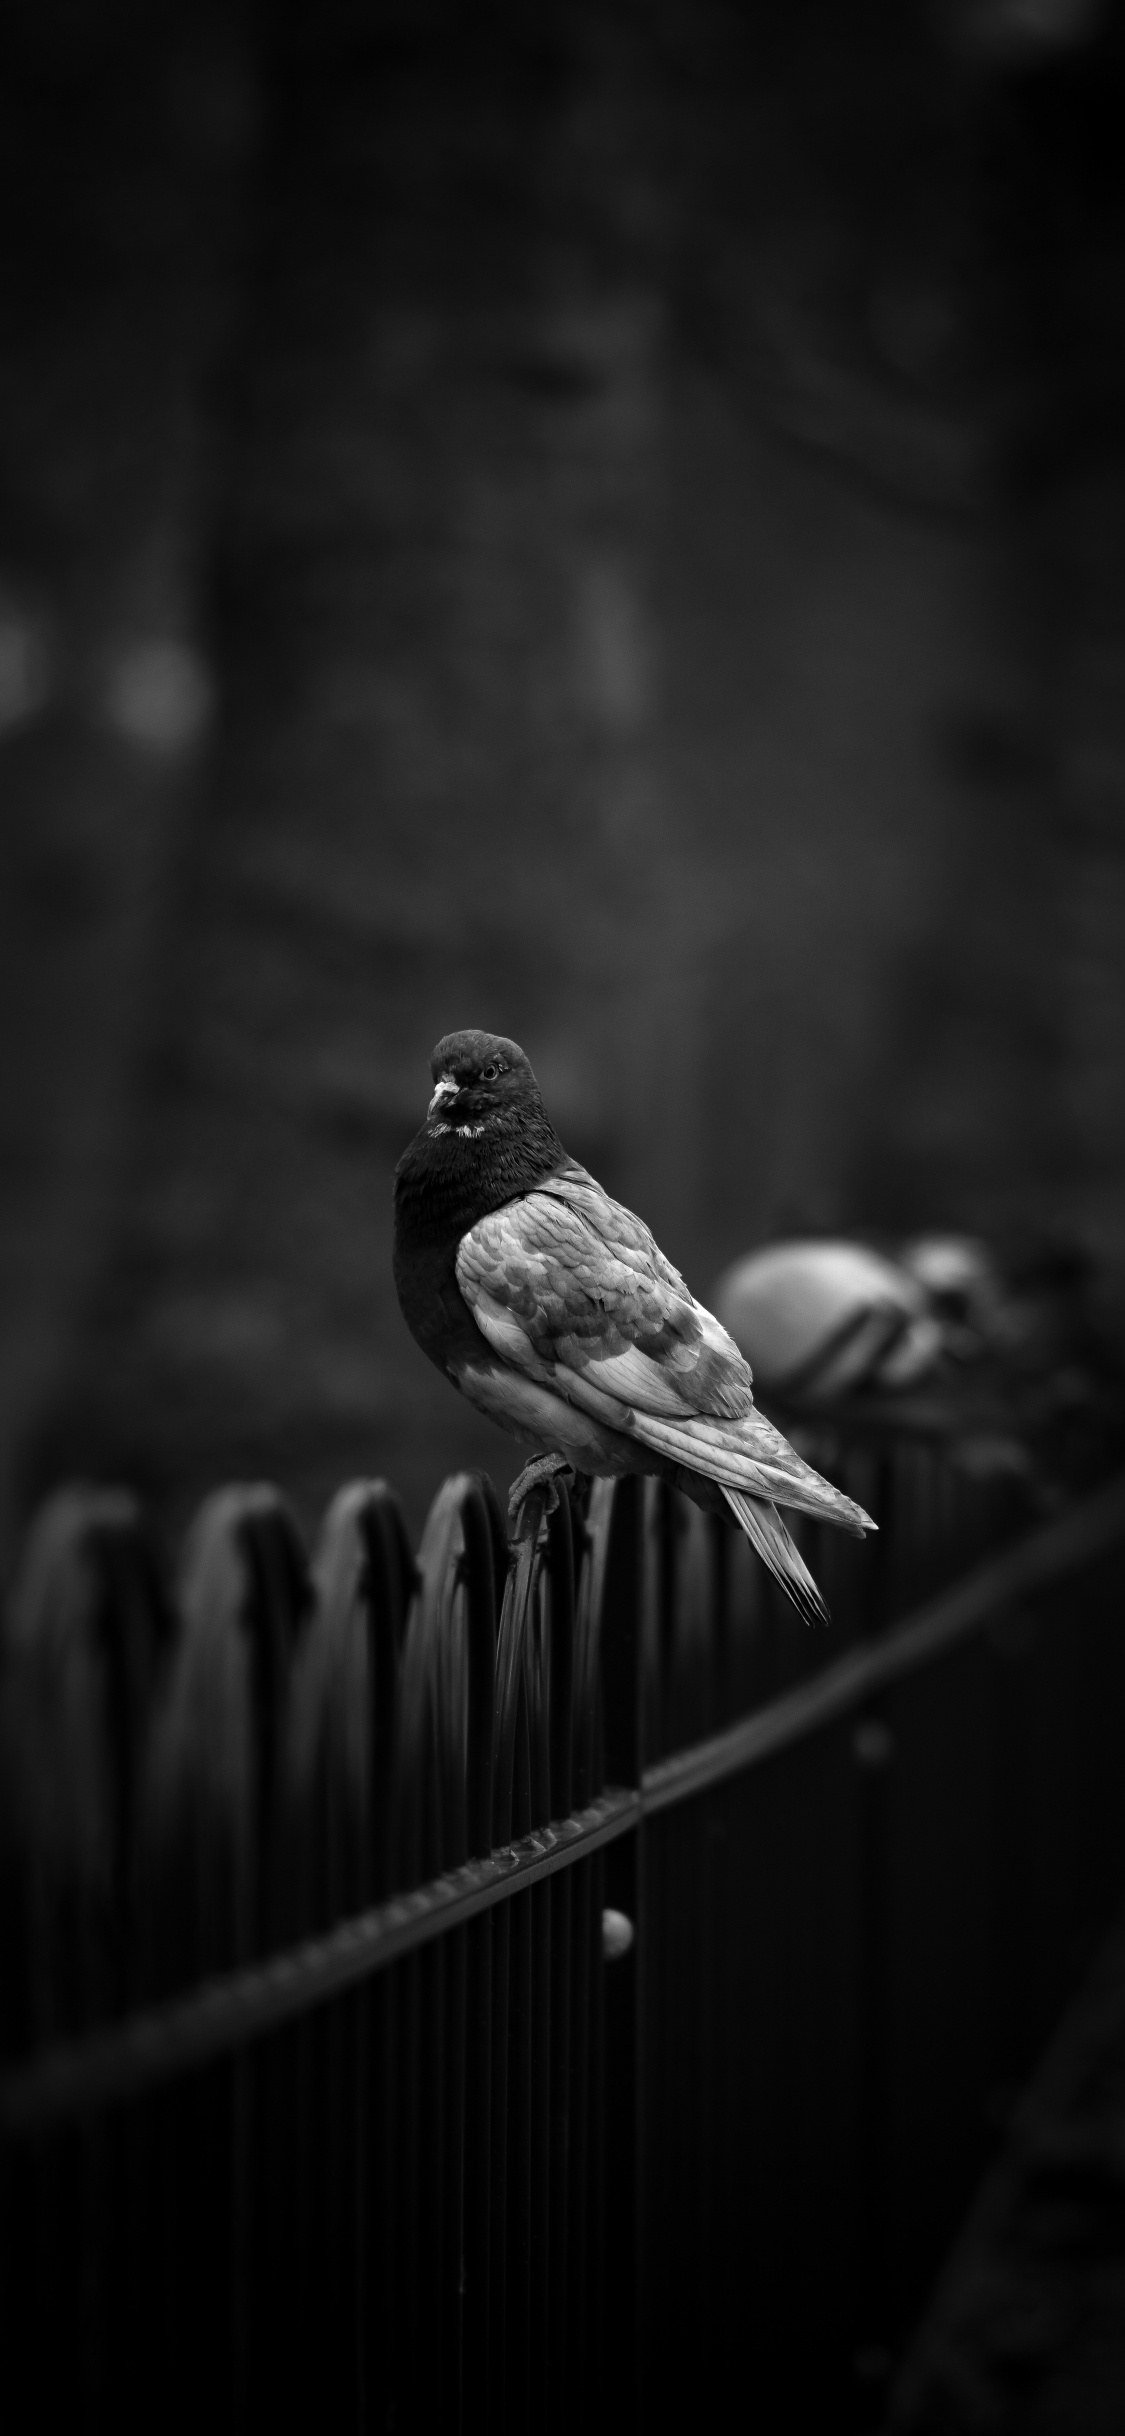 Grayscale Photo of a Bird on a Wooden Fence. Wallpaper in 1125x2436 Resolution